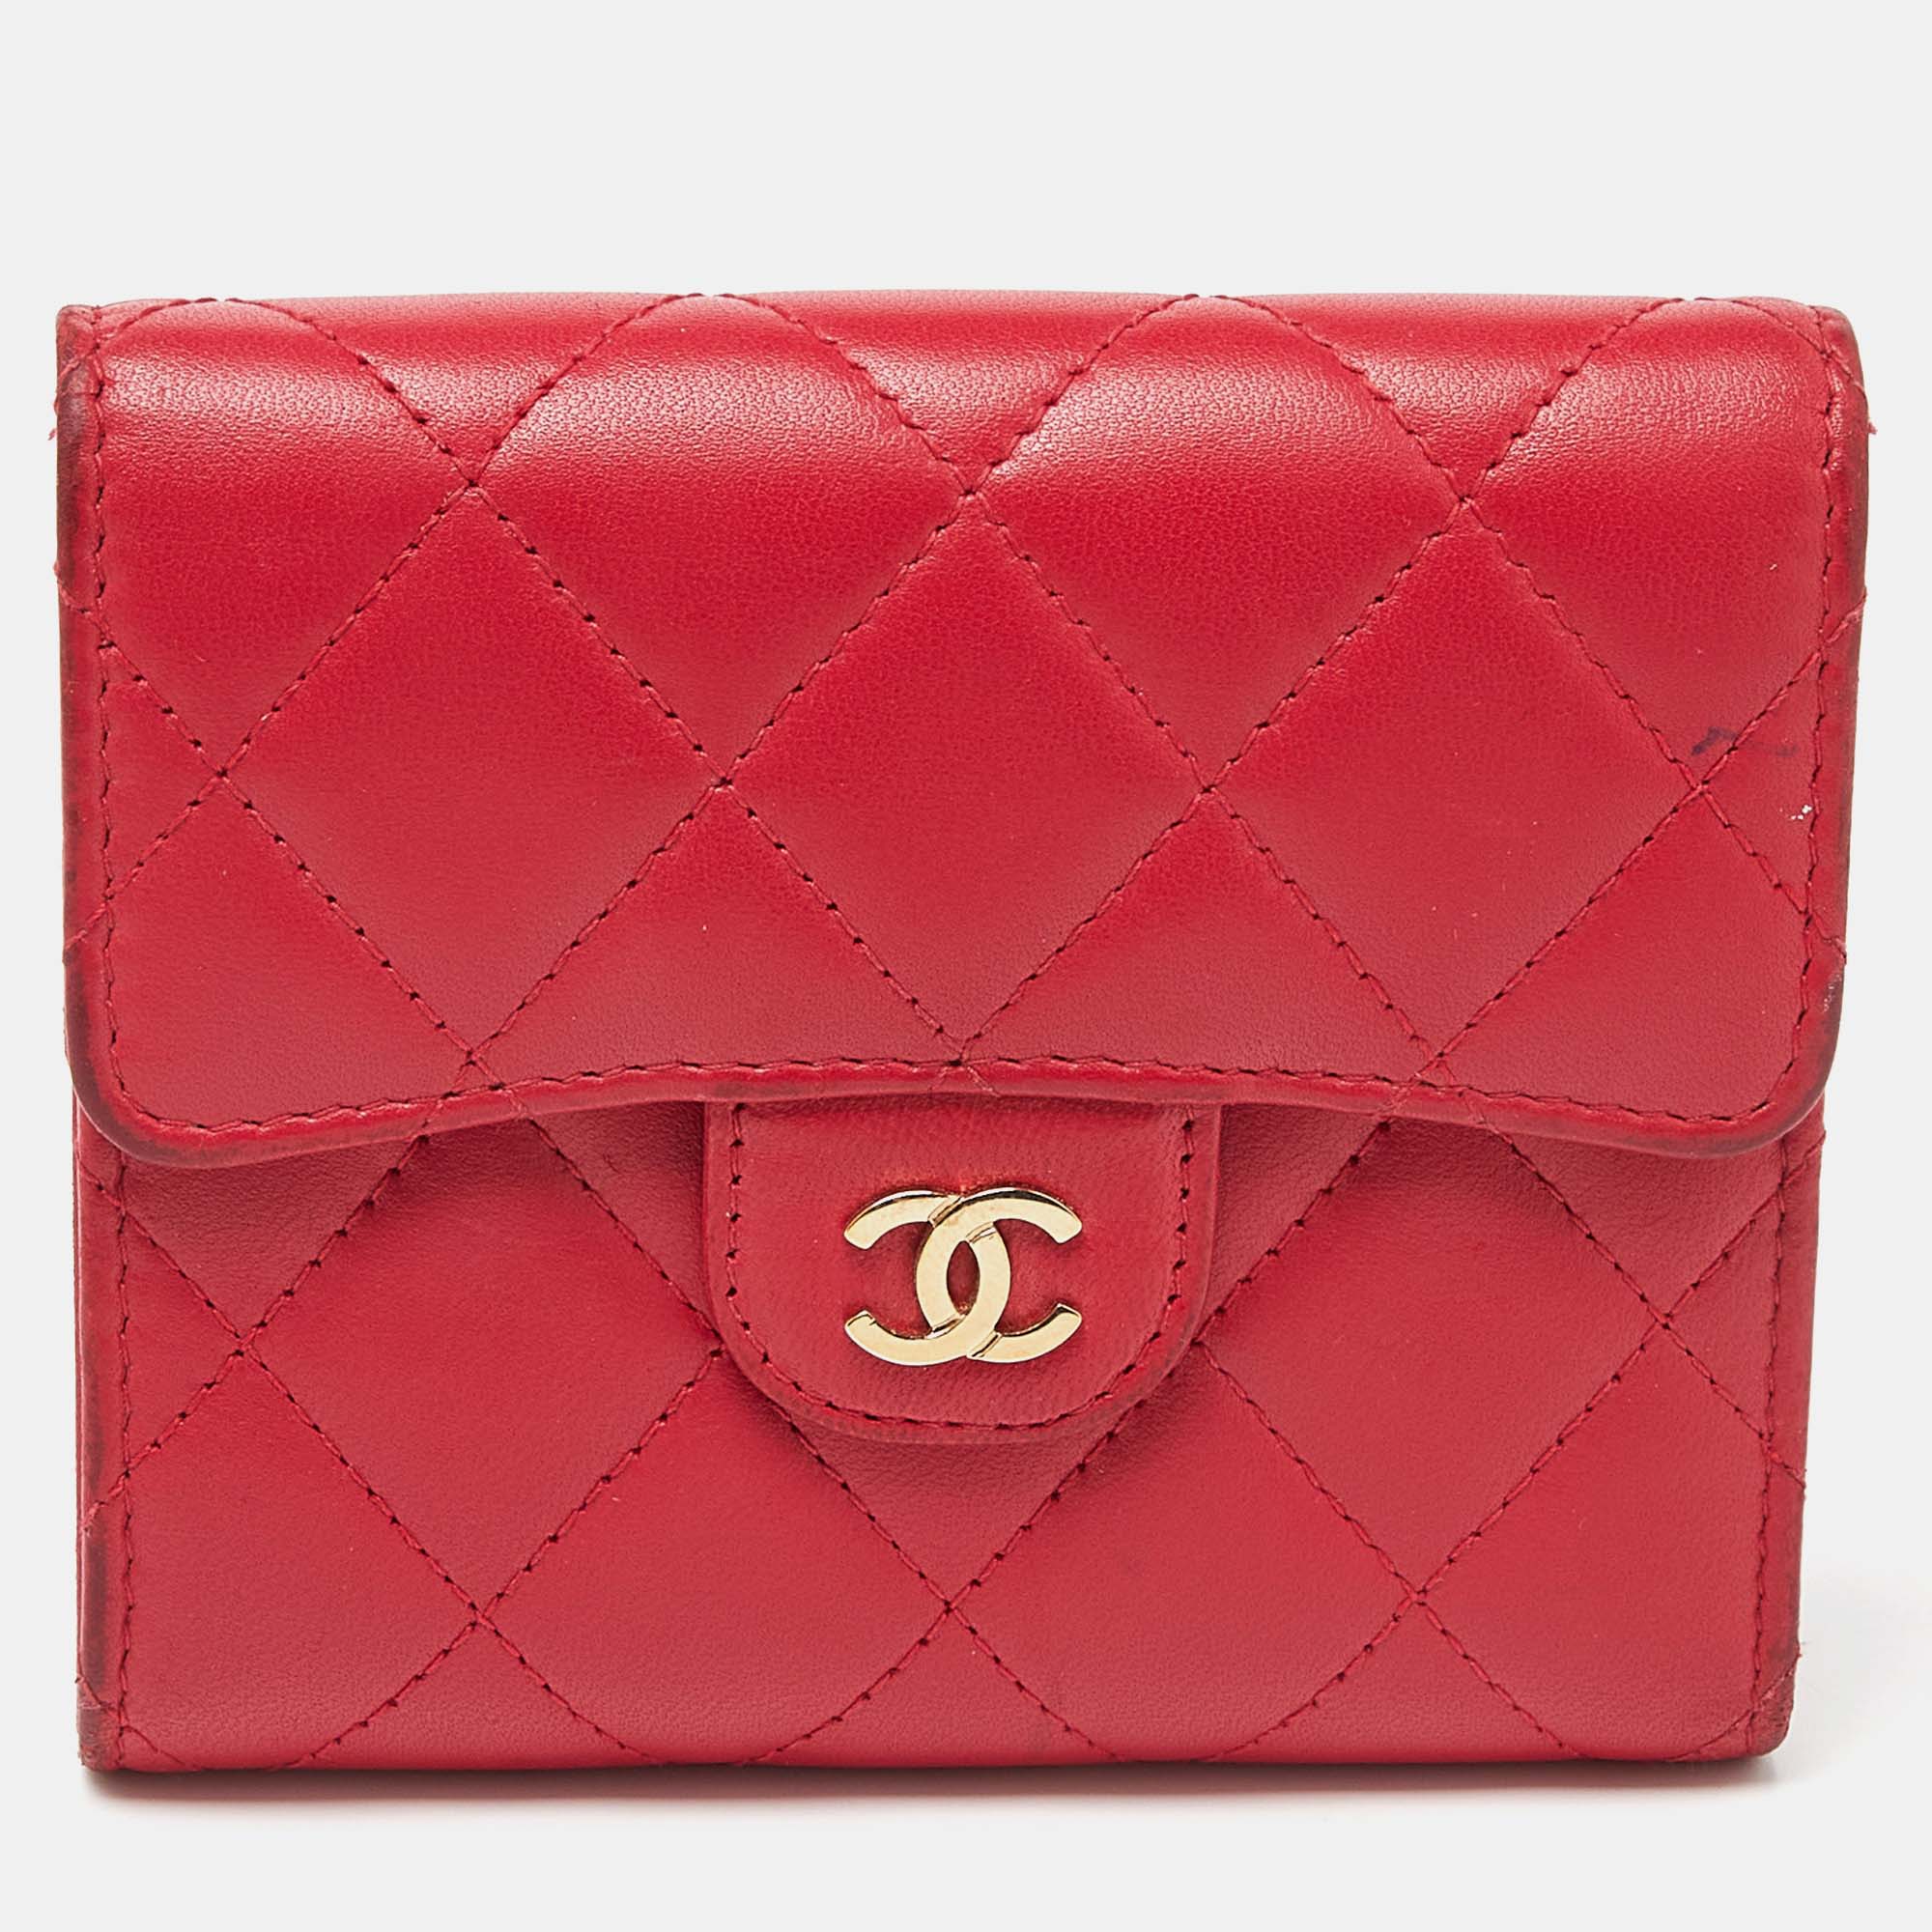 Chanel red quilted leather trifold cc wallet